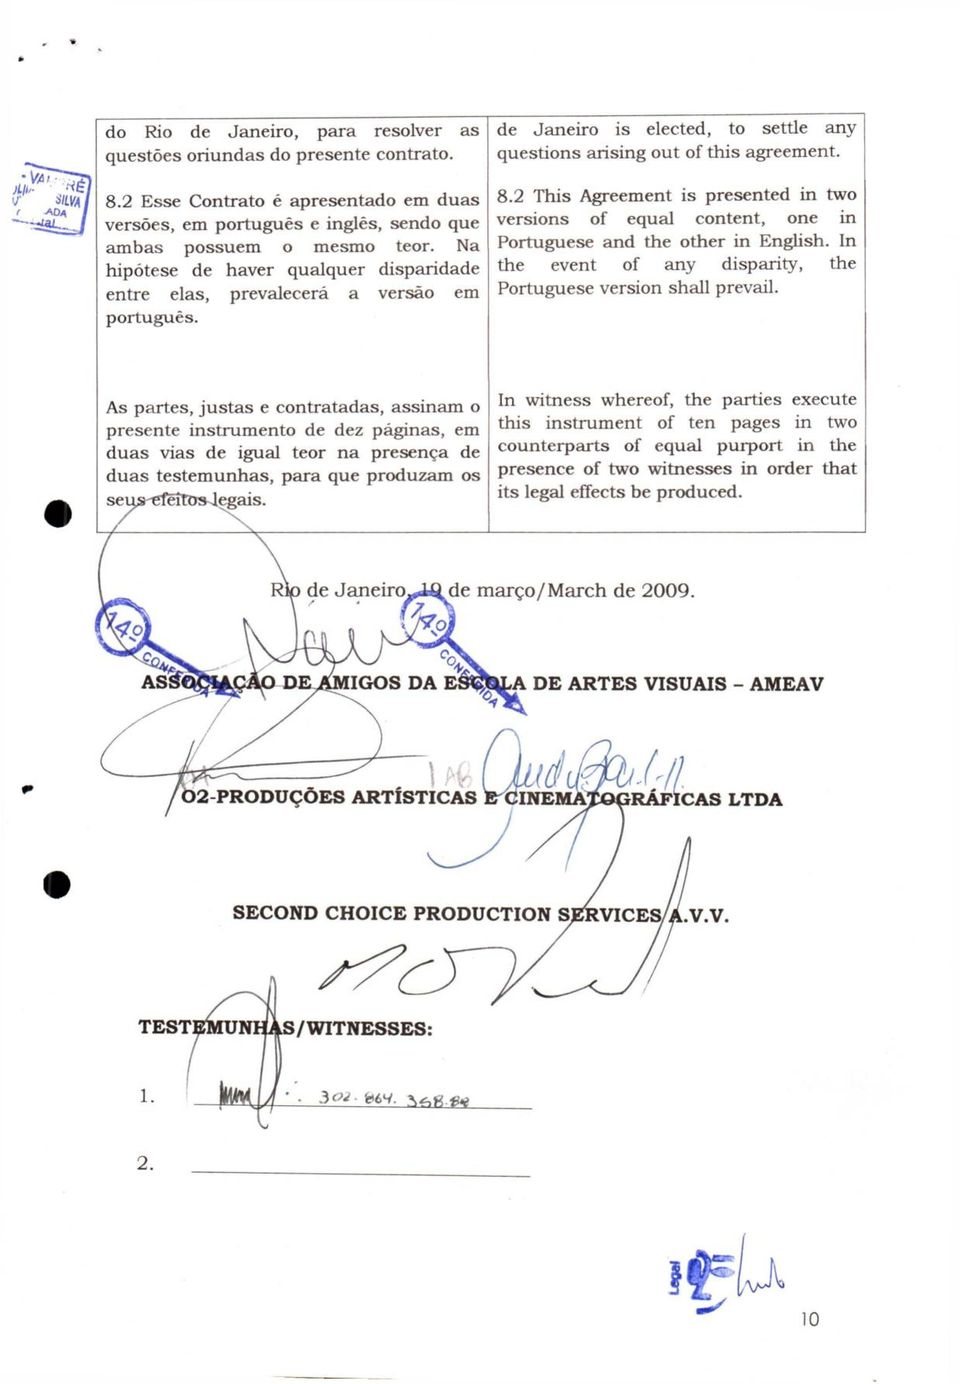 2 This Agreement is presented in two versions of equal content, one in Portuguese and the other in English. In the event of any disparity, the Portuguese version shall prevail.